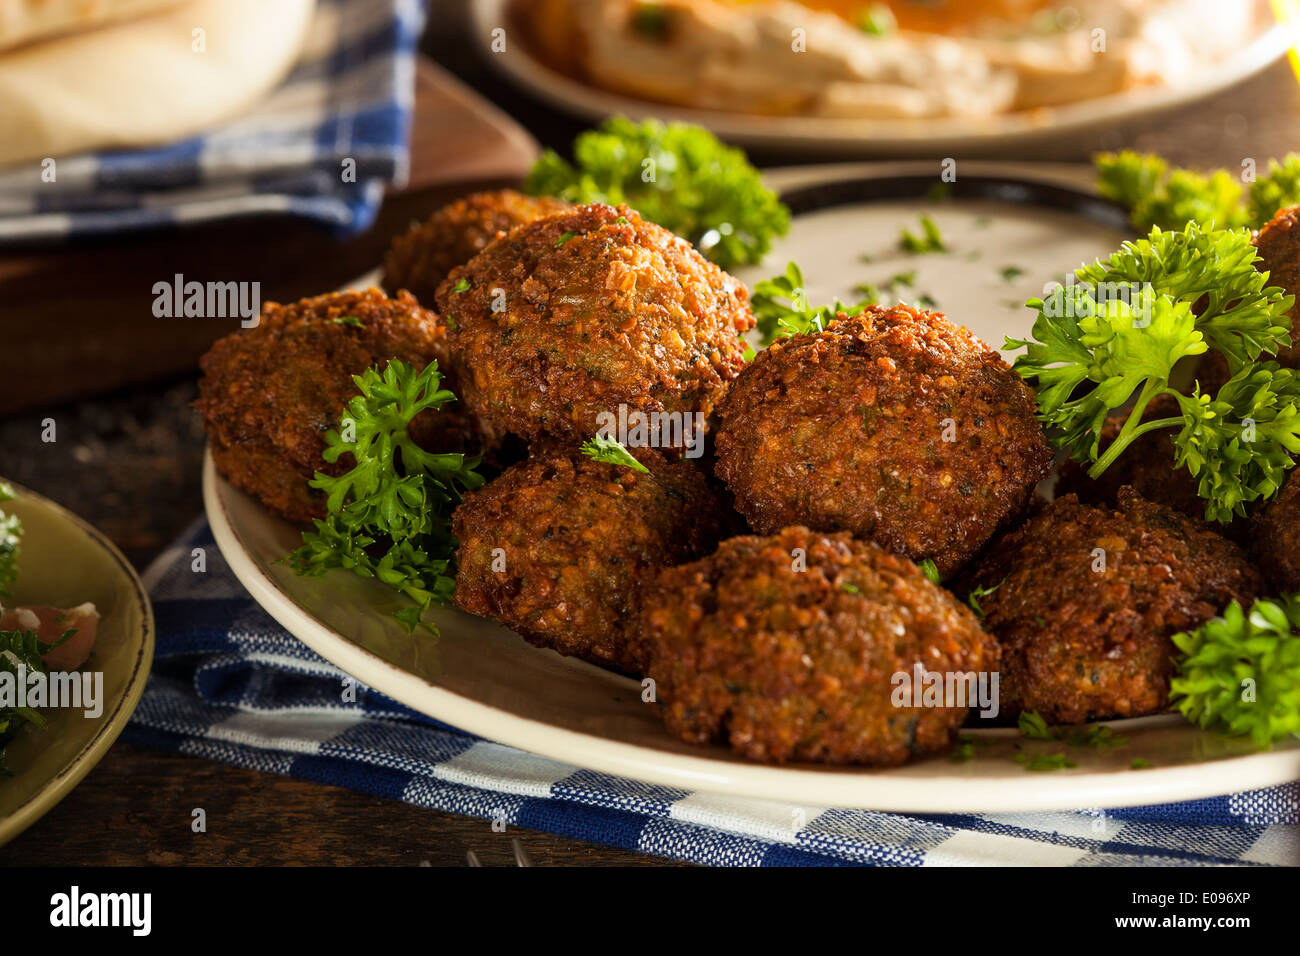 Healthy Vegetarian Falafel Balls with Rice and Salad Stock Photo - Alamy